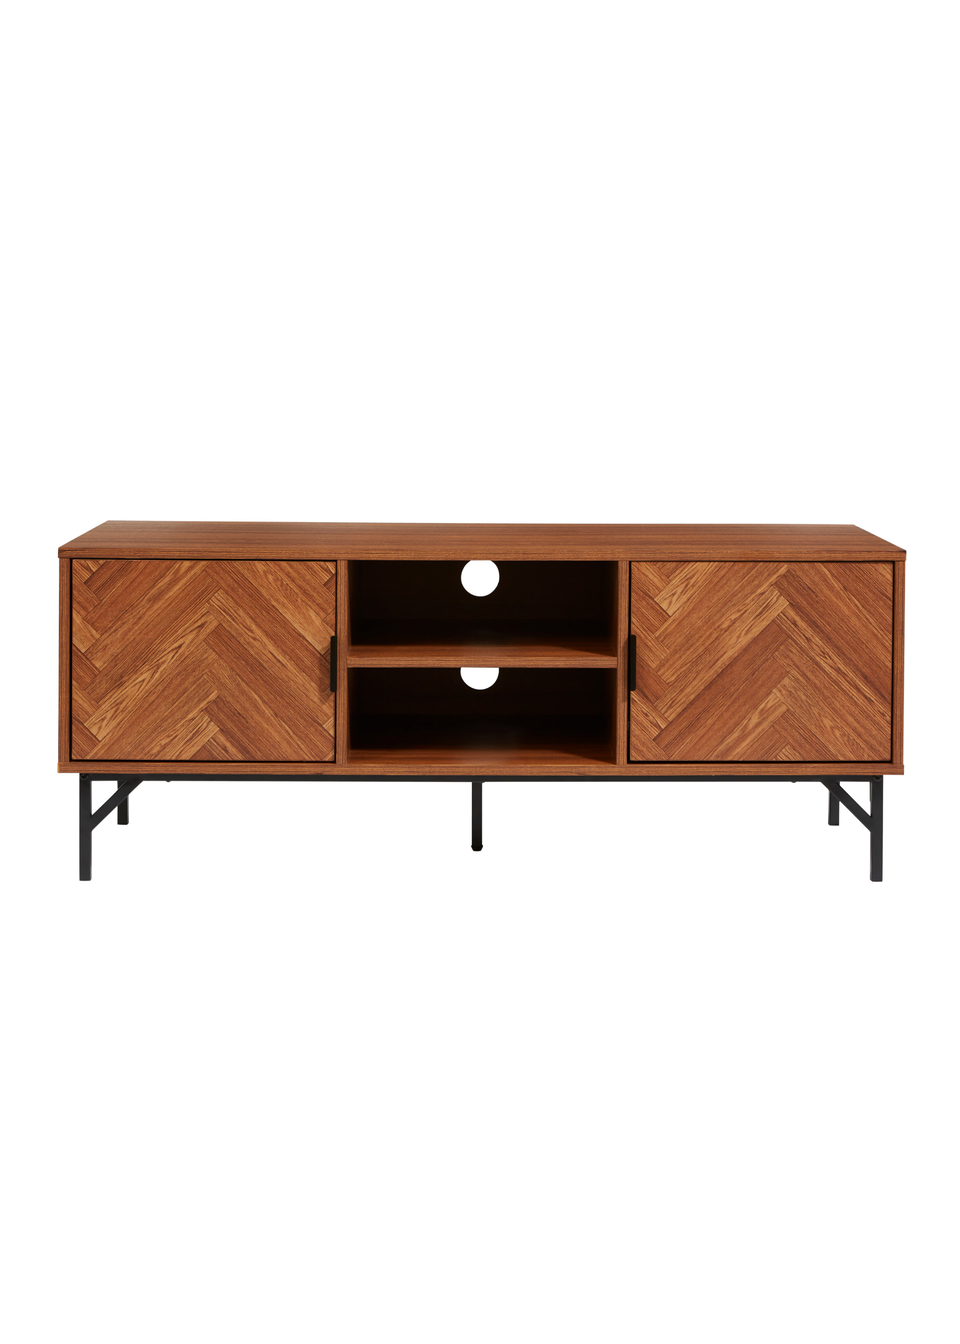 Lloyd Pascal Caprio TV unit with Metal Legs